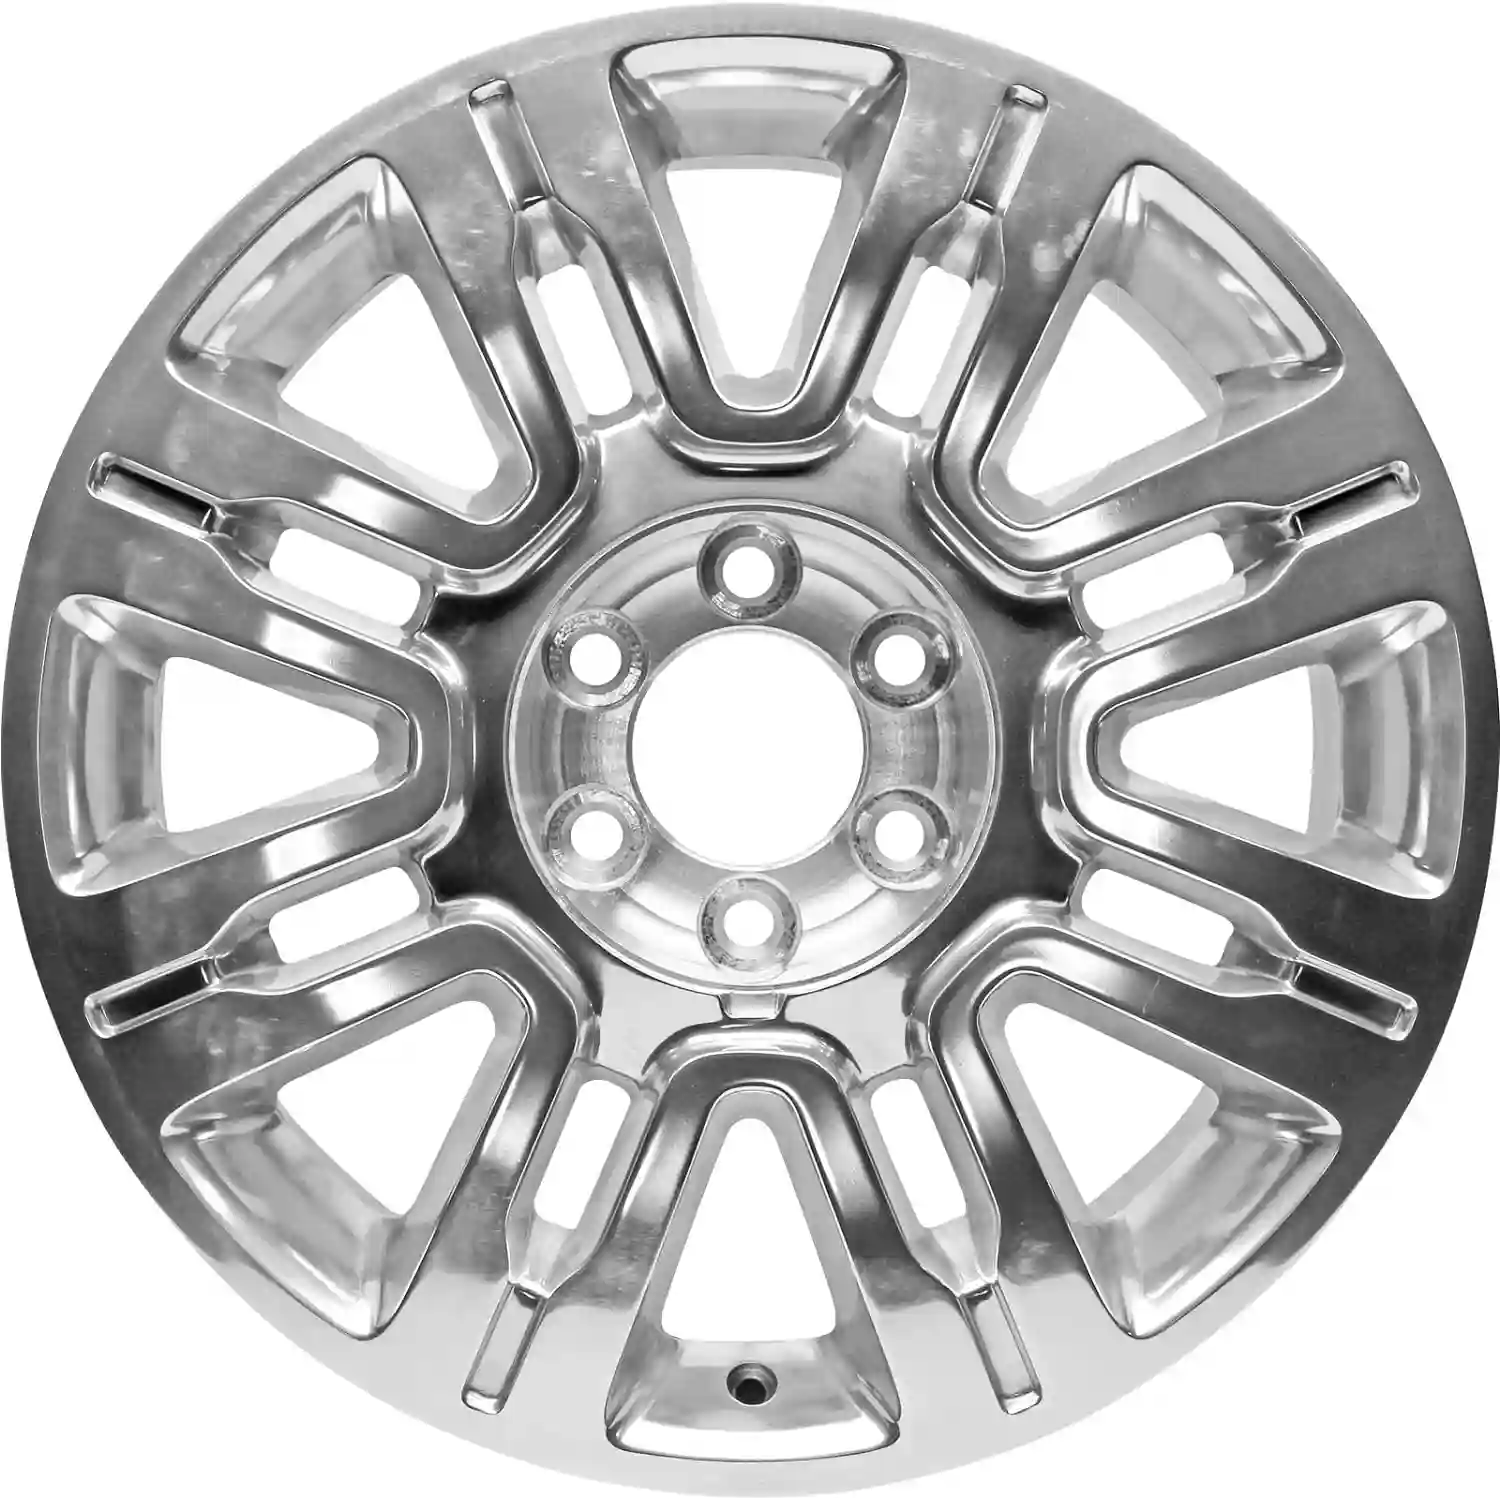 Factory Wheel Replacement New 20x8.5" 20 Inch Polished Premium Aluminum Alloy Wheel Rim for 2009-2014 Ford F150 and Expedition | ALY03788U80N | Direct Fit - OE Stock Specs
